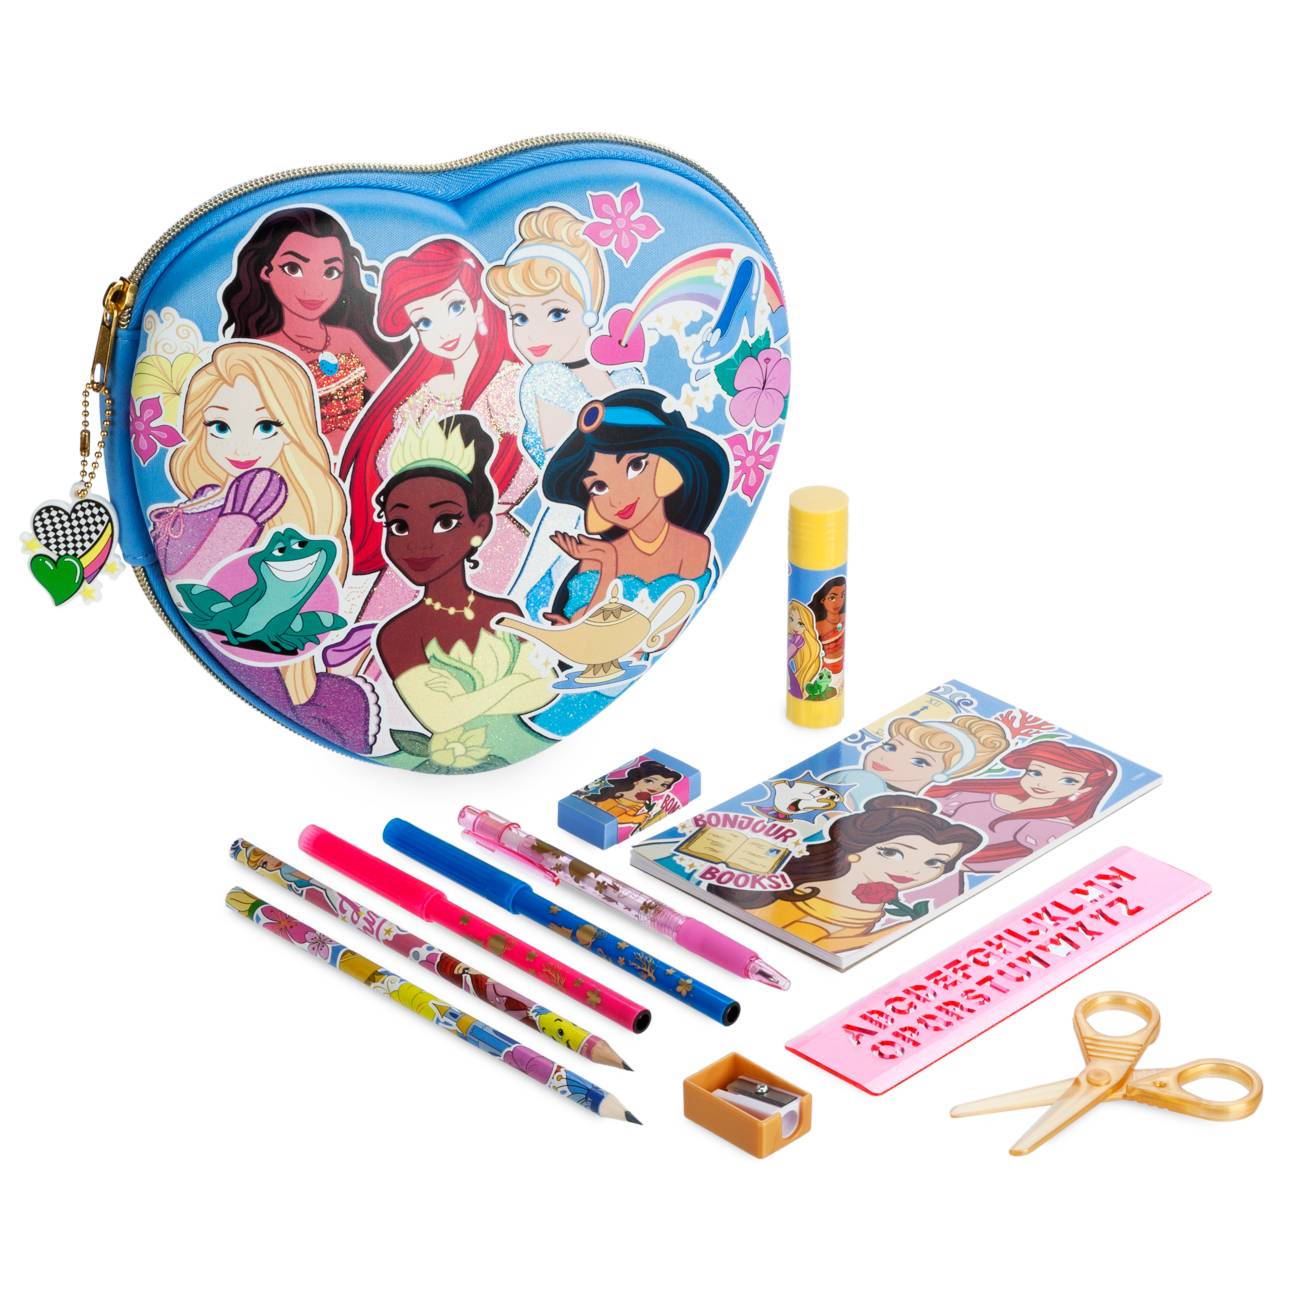 shopDisney Back to School Supplies Starting at $5.98 + Free Shipping